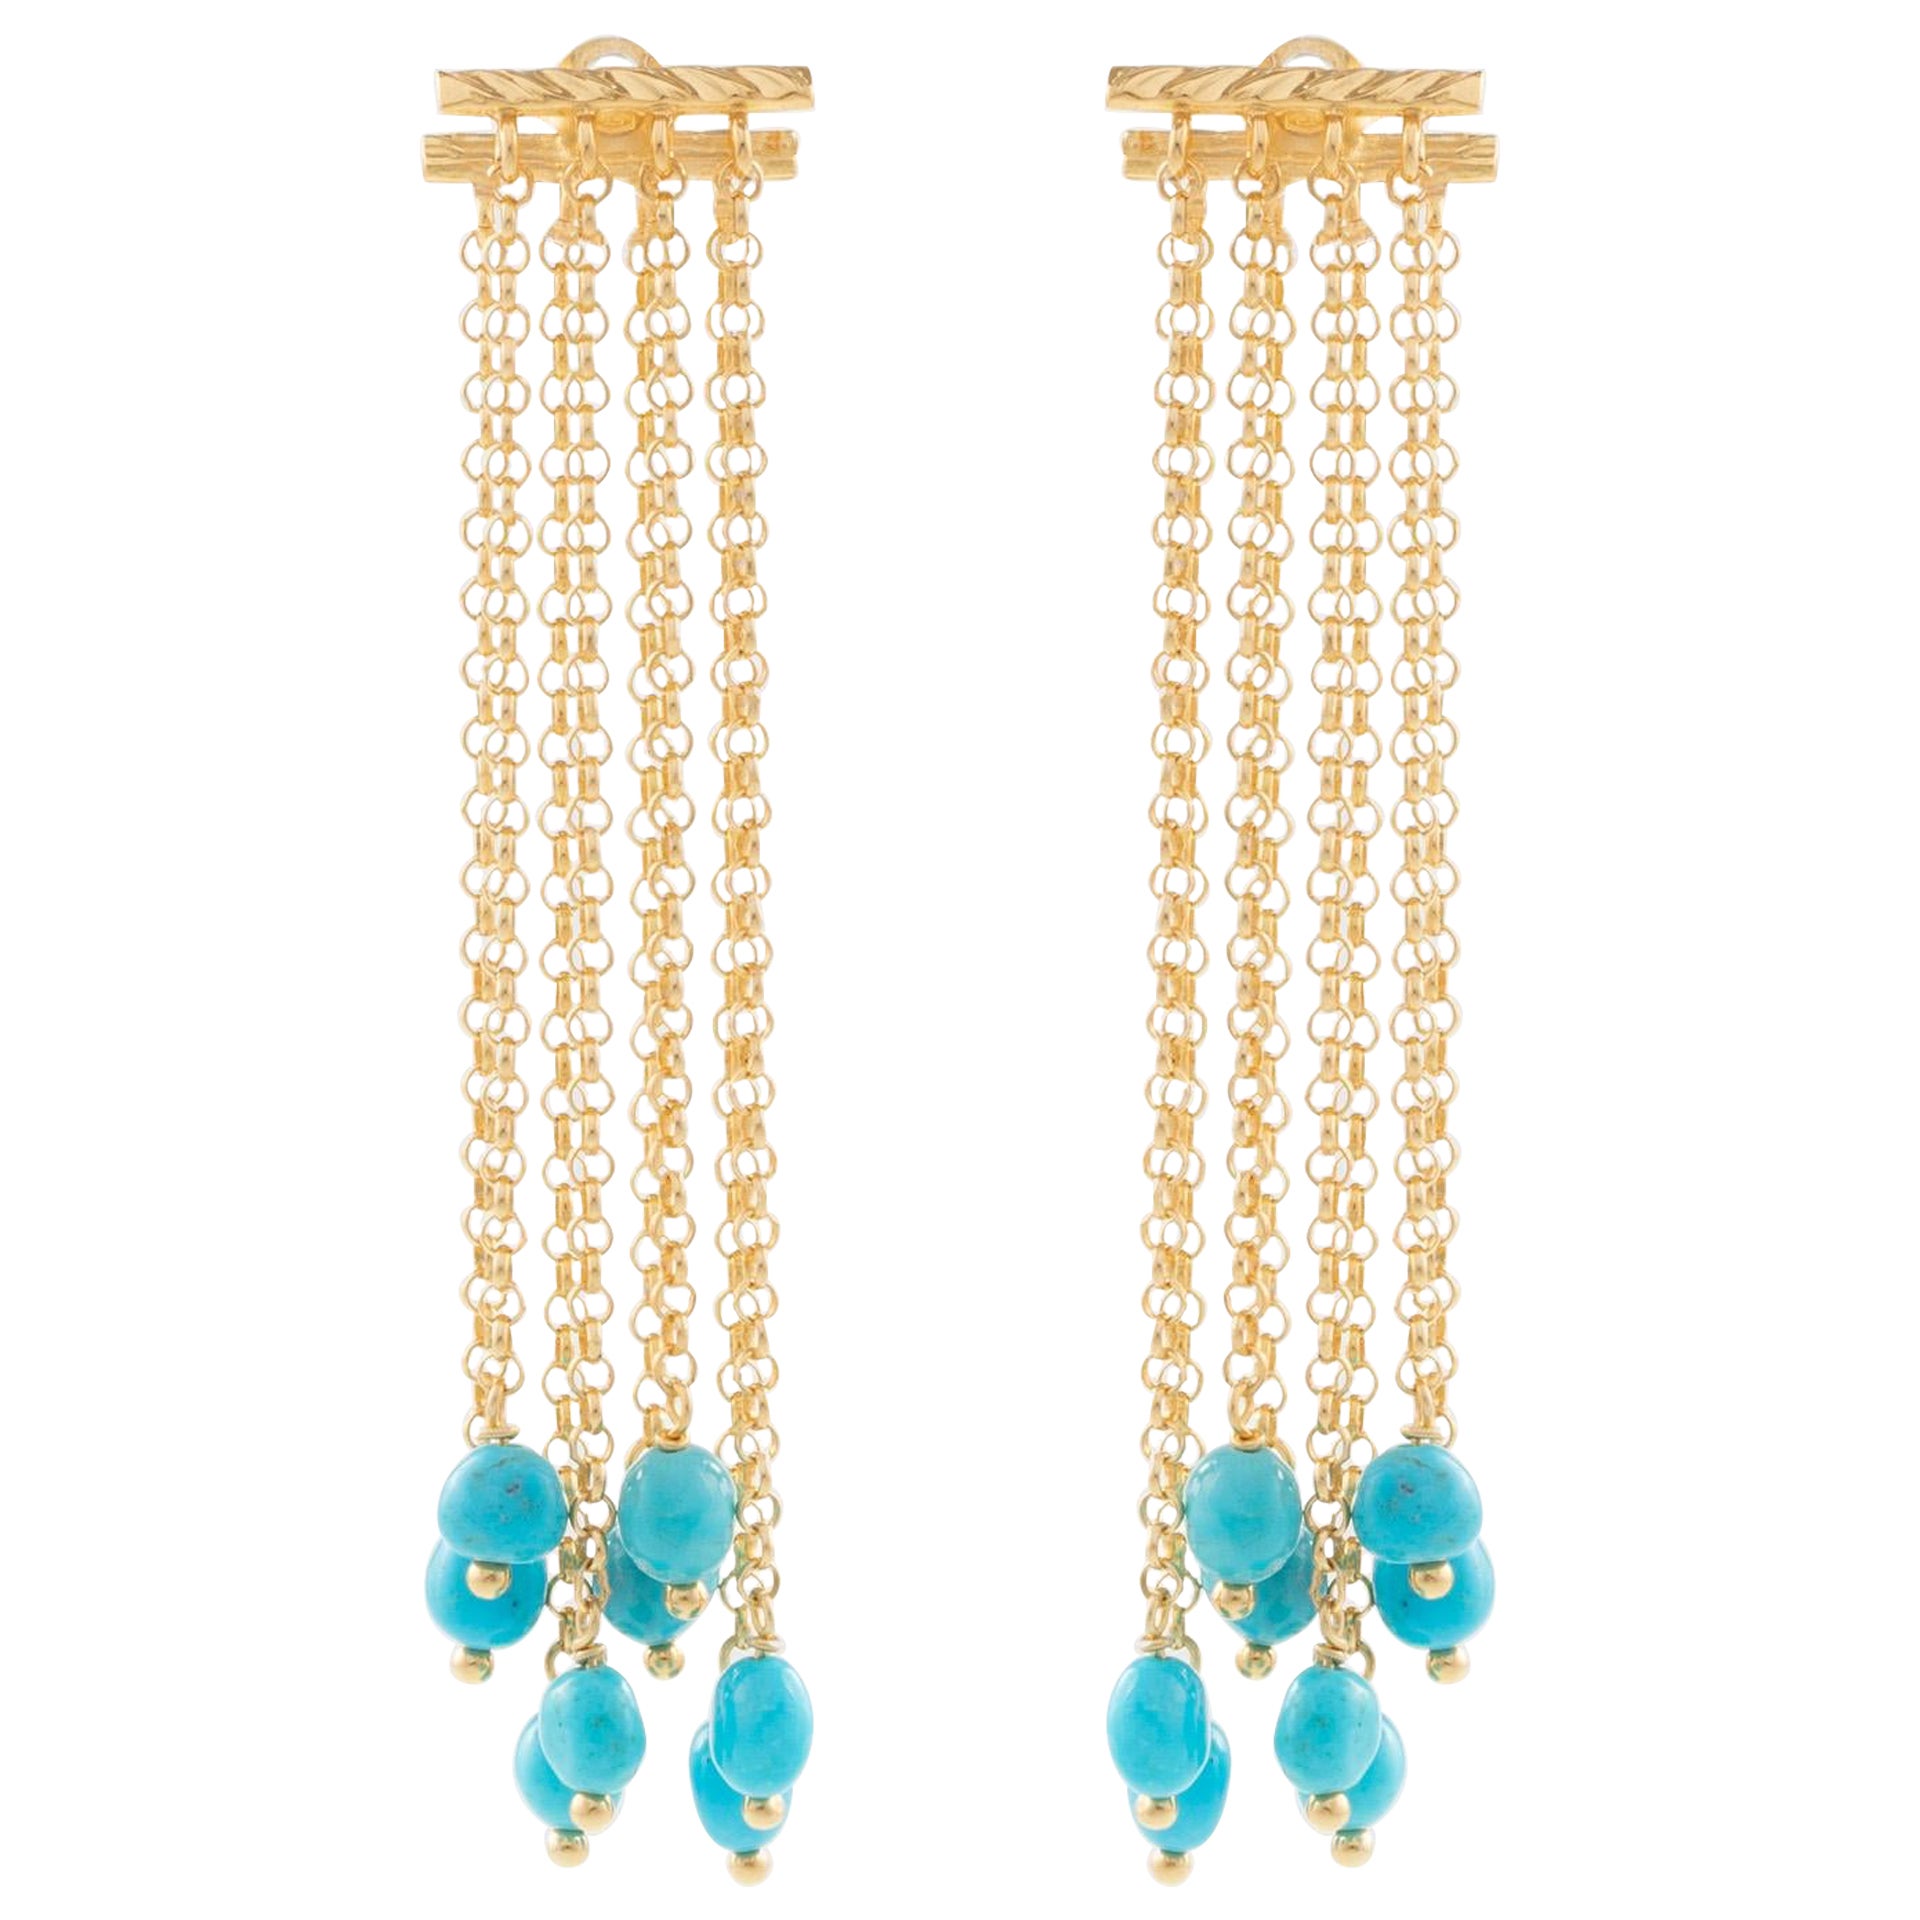 Earrings, 925 sterling silver, 18 kt. gold plated, natural turquoise, turquoise  For Sale